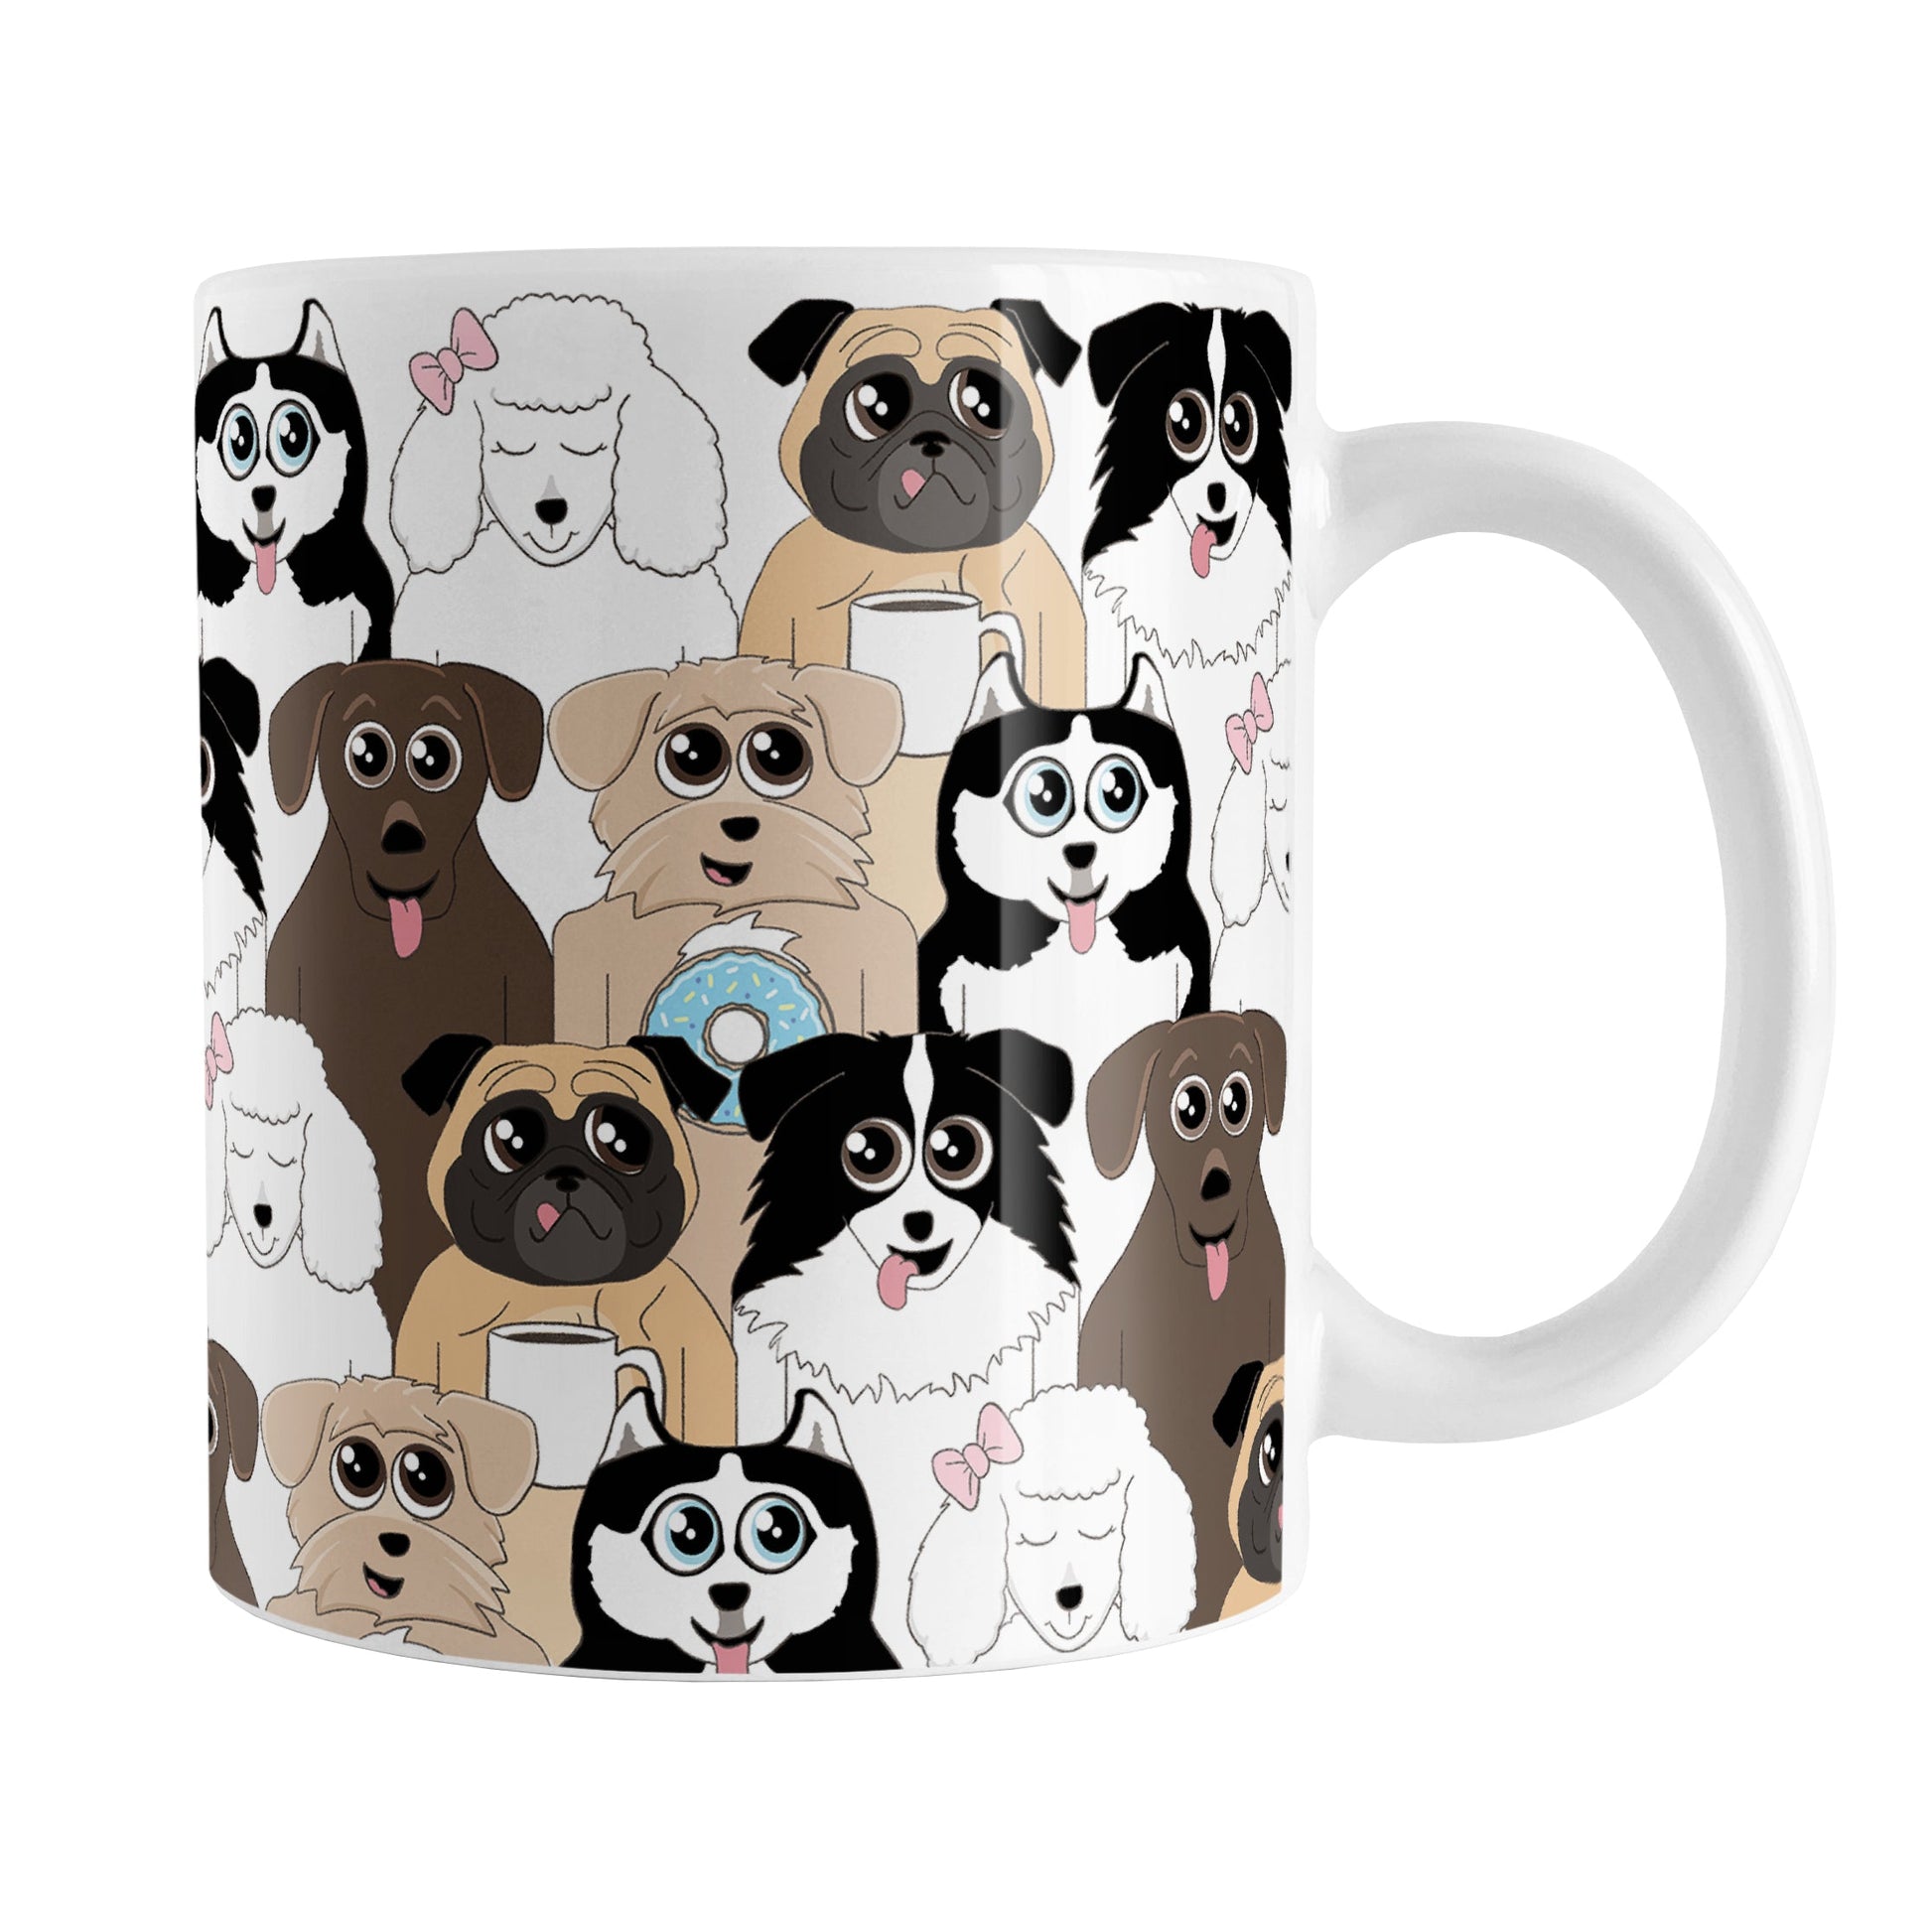 Cute Dog Stack Pattern Mug (11oz) at Amy's Coffee Mugs. Cute dogs mug with an illustrated pattern of different breeds of dogs with different fun expressions, with coffee and and donuts. This stacked pattern of dogs wraps around the ceramic mug to the handle.